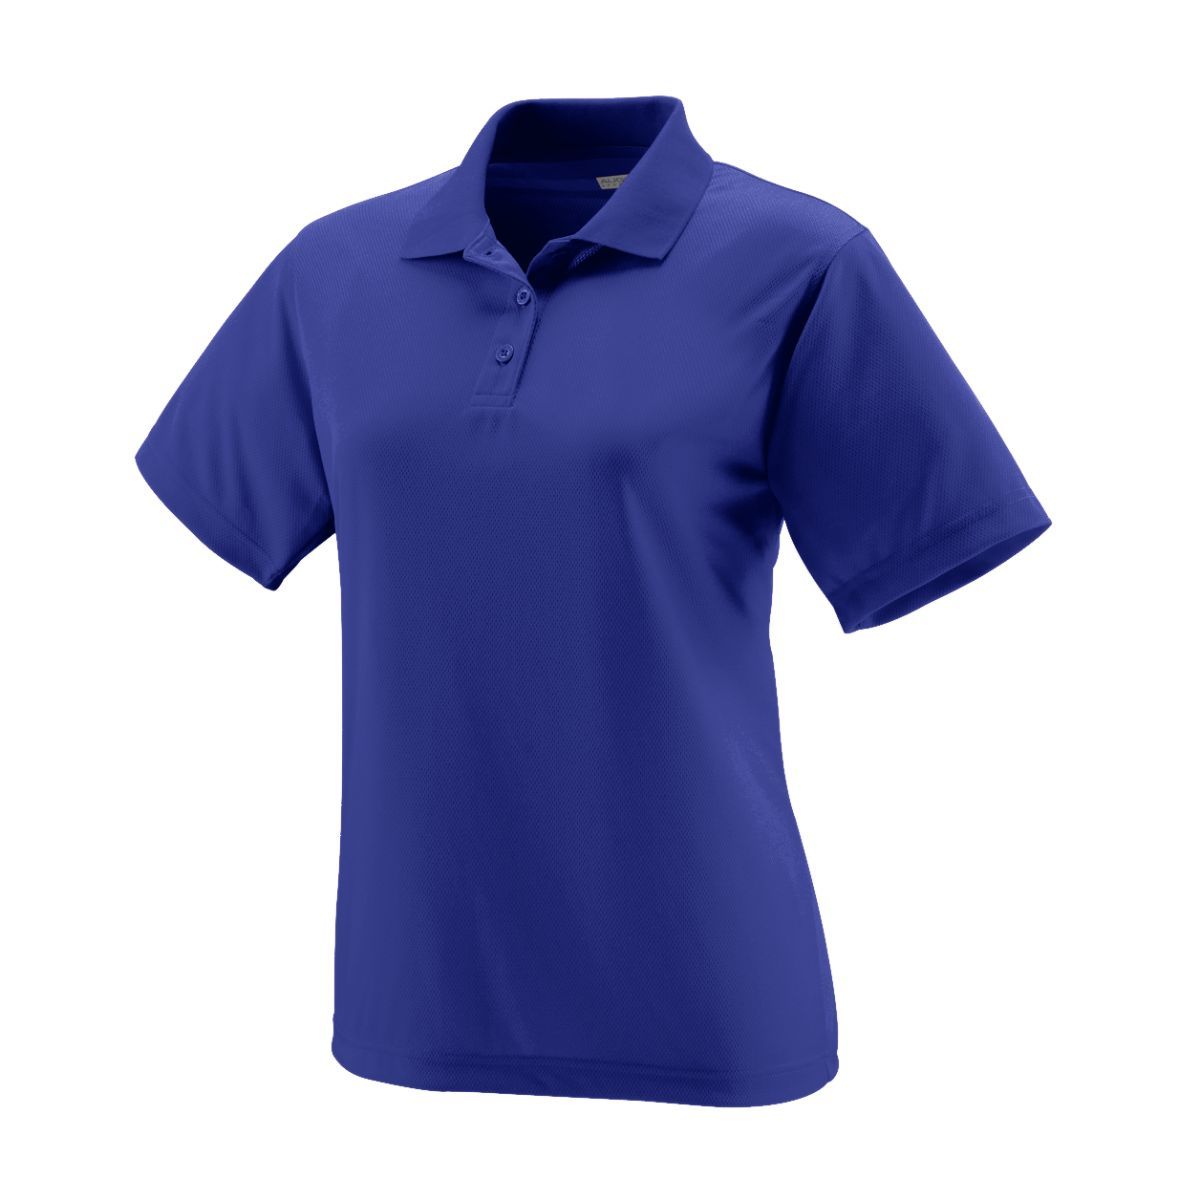 Augusta Sportswear Ladies Wicking Mesh Polo in Purple  -Part of the Ladies, Ladies-Polo, Polos, Augusta-Products, Tennis, Shirts product lines at KanaleyCreations.com